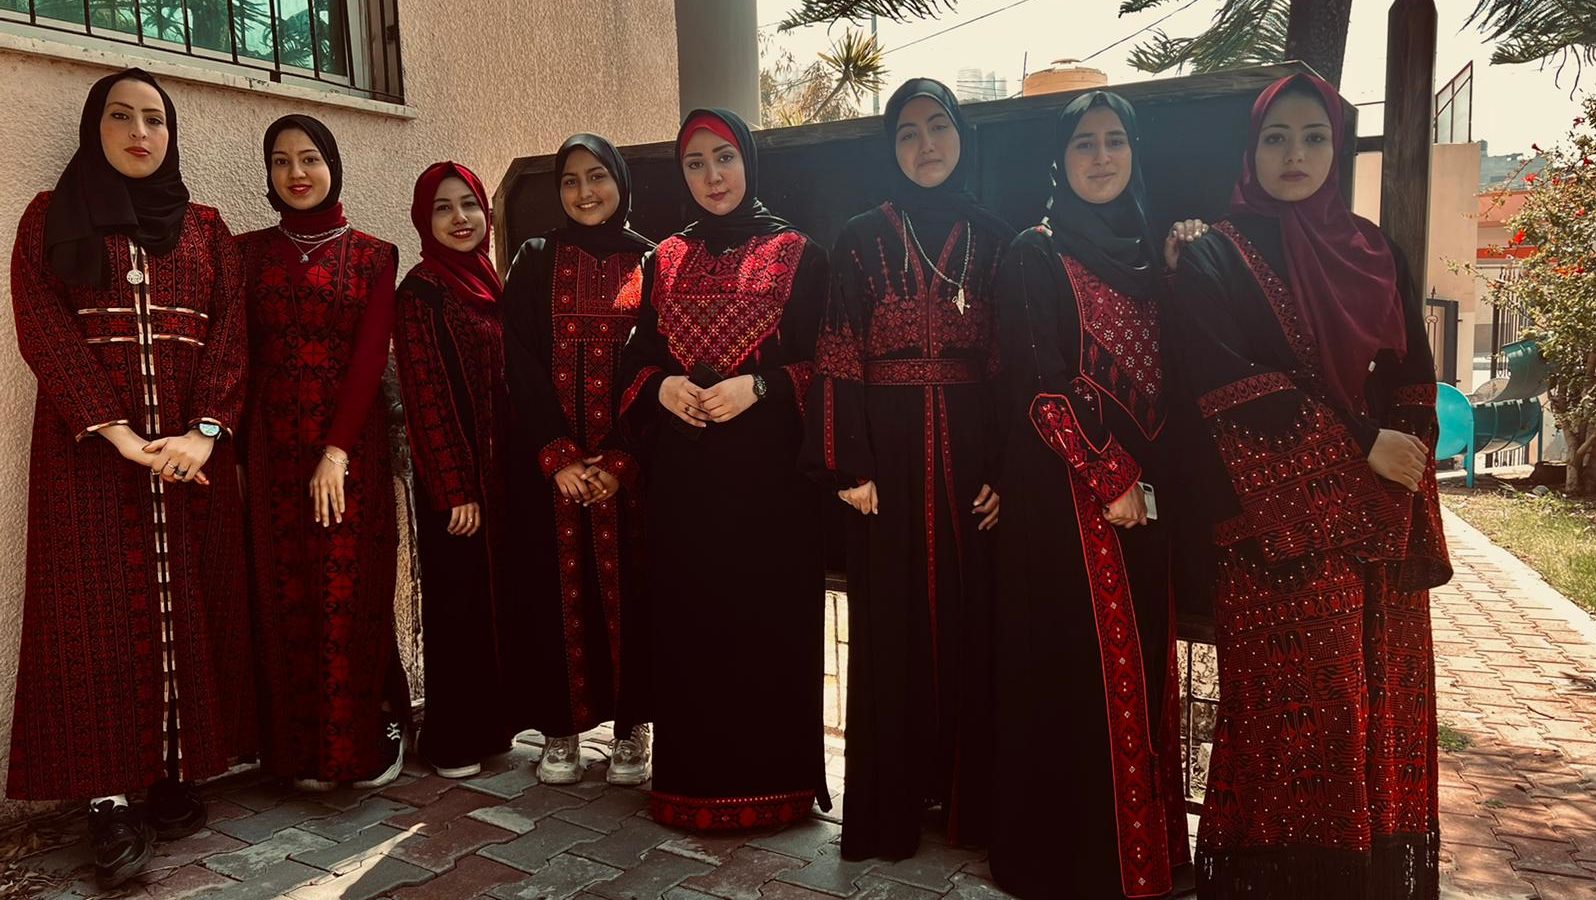 Gaza’s First Female Band Seeks To Revive Palestinian Folklore, Heritage